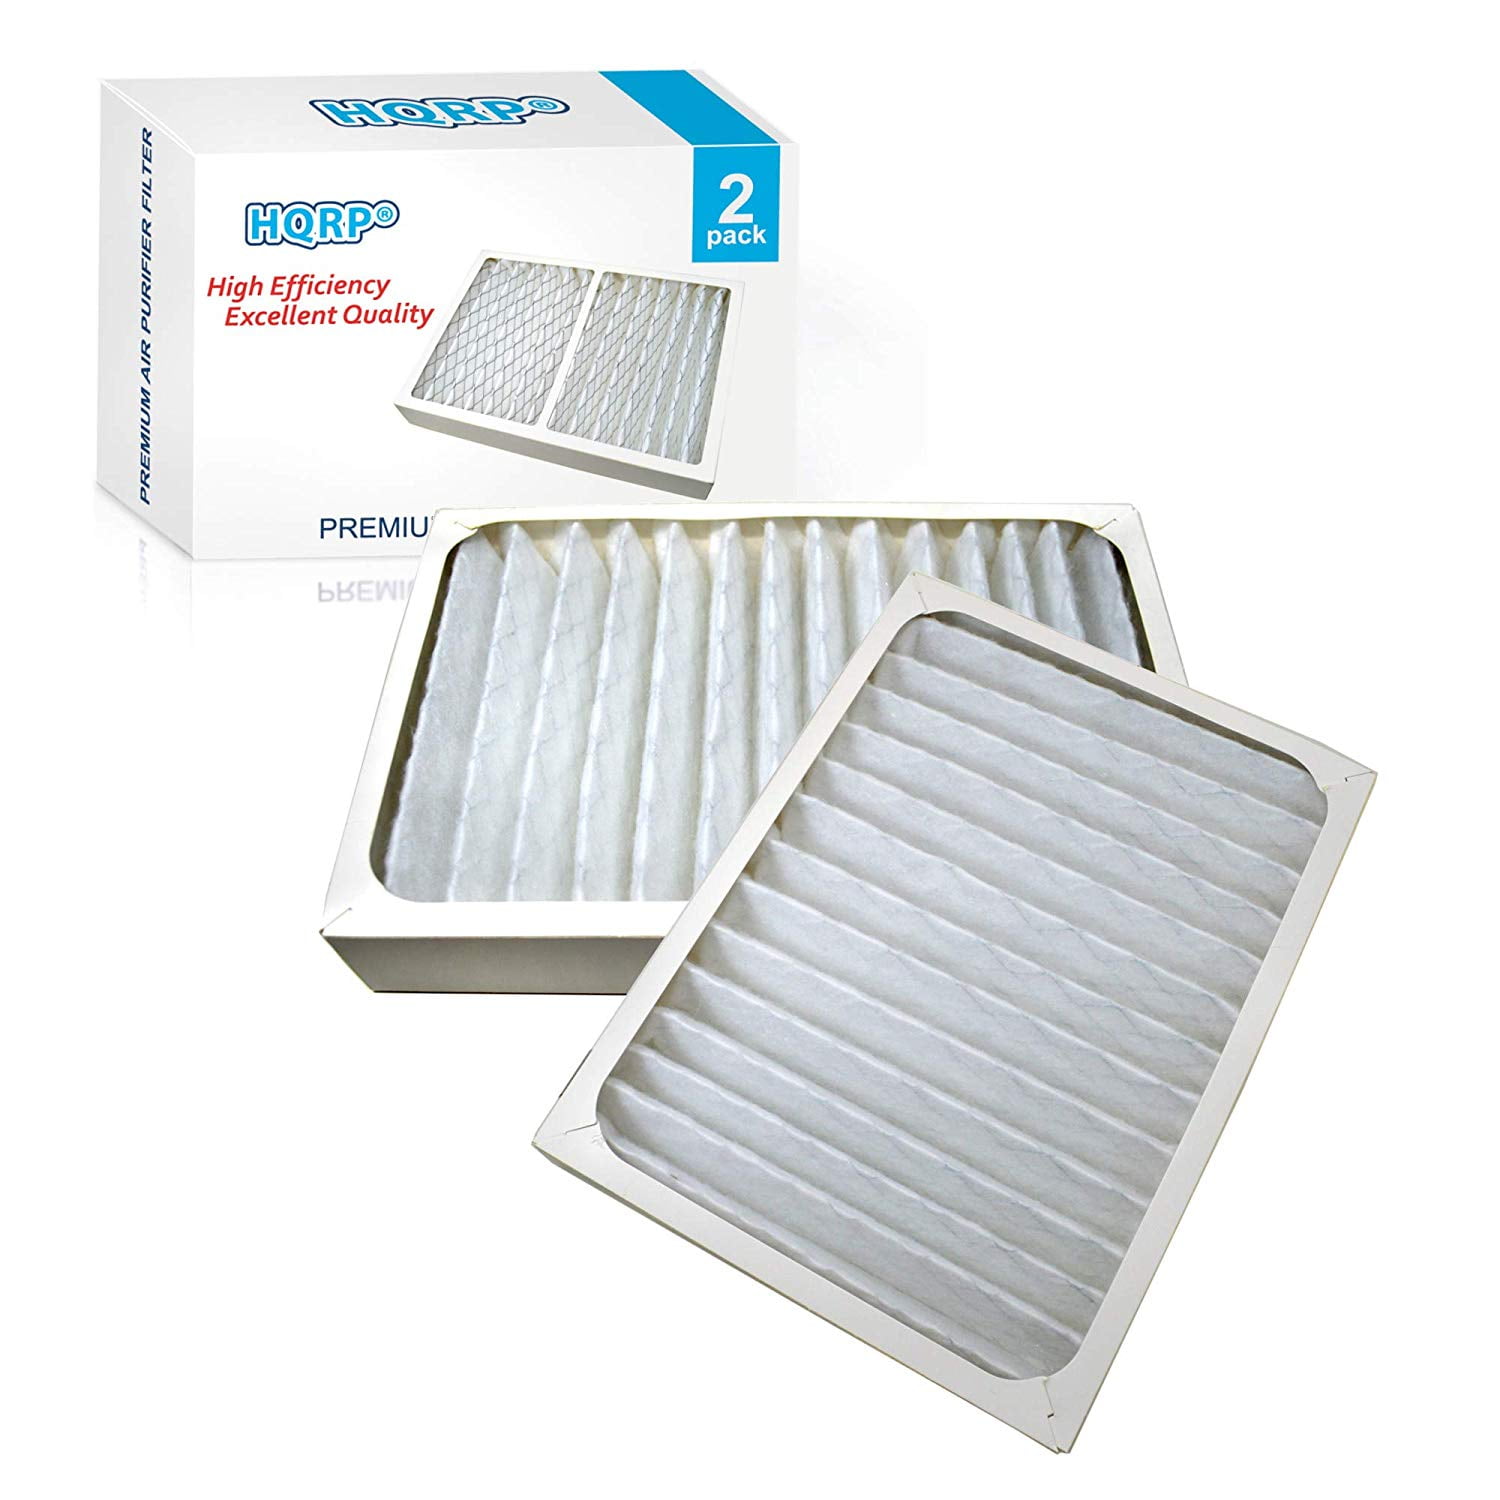 HEPA Filter Replacement Hunter Part 30928 For HEPAtech Air Purfiers 